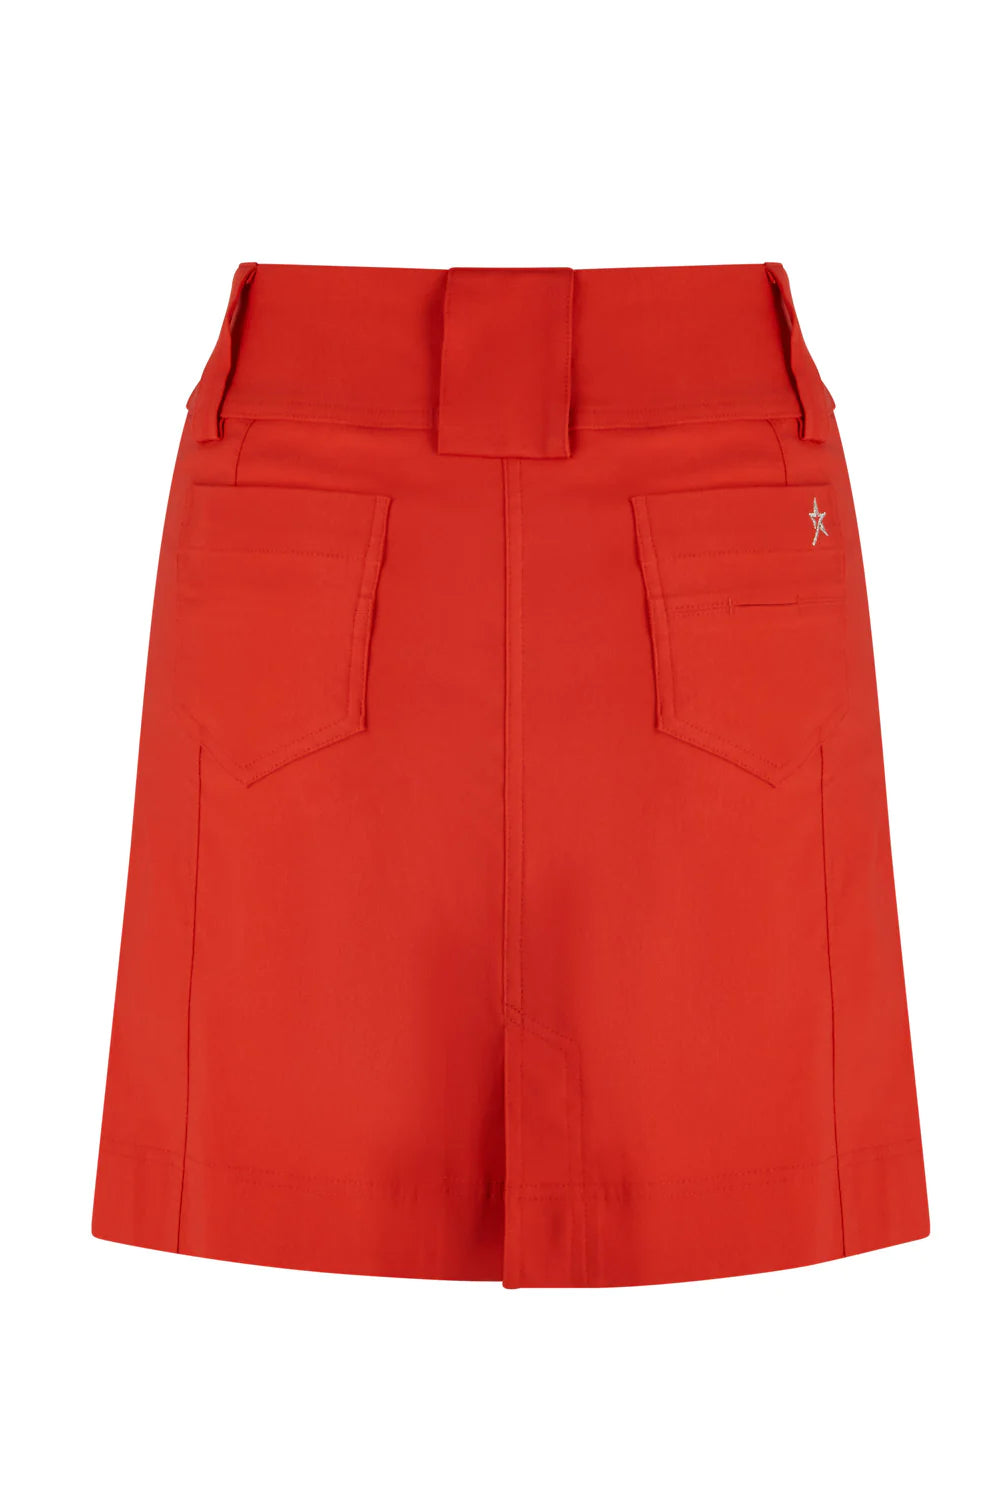 Swing Out Sister Stella Skort - Luscious Red